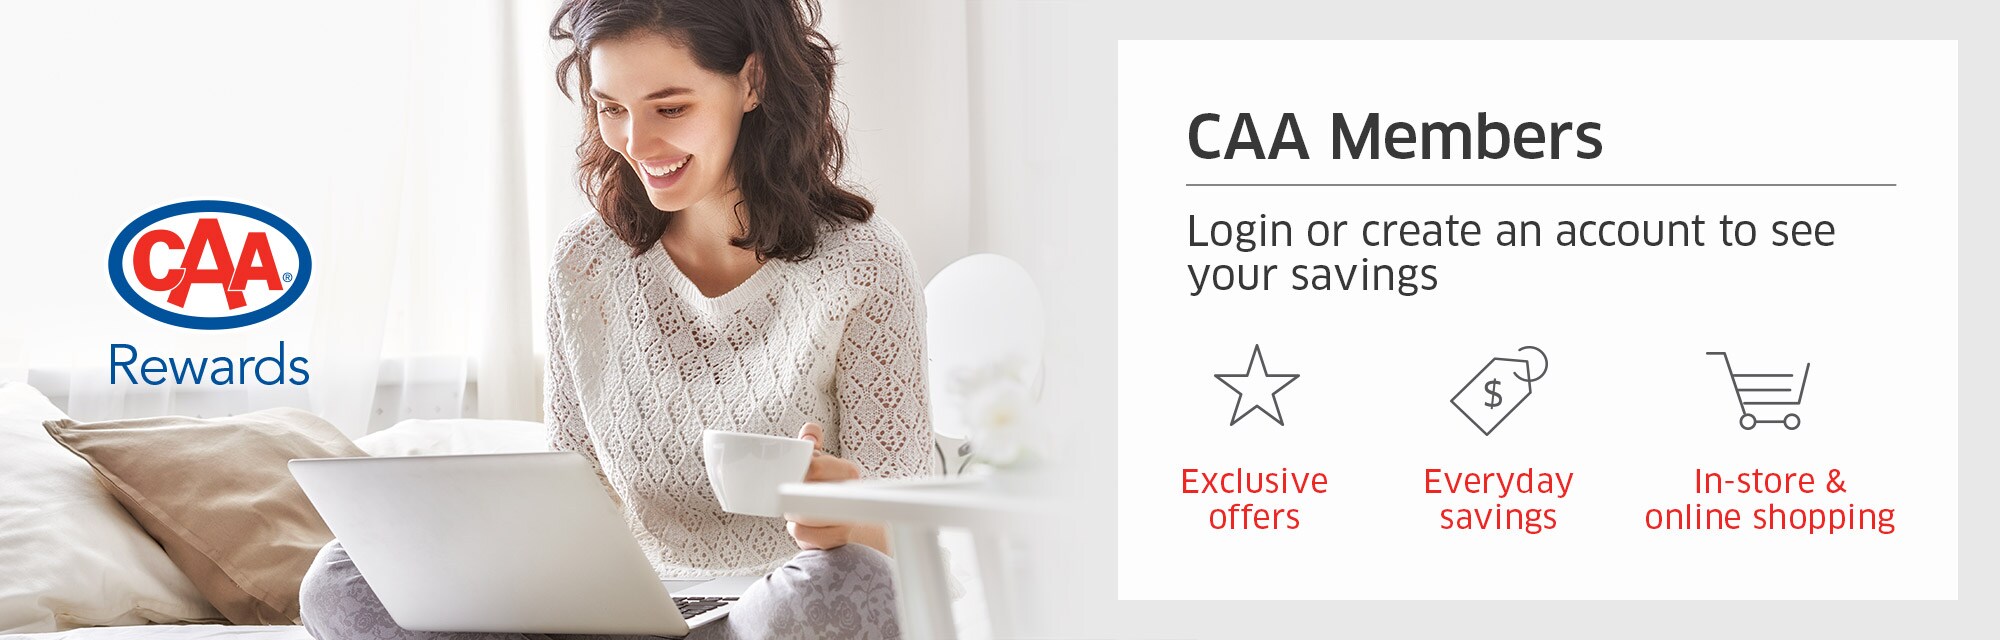  CAA Members Log in or create an account to see your savings  Exclusive offers  Everyday savings  In-store & online shopping